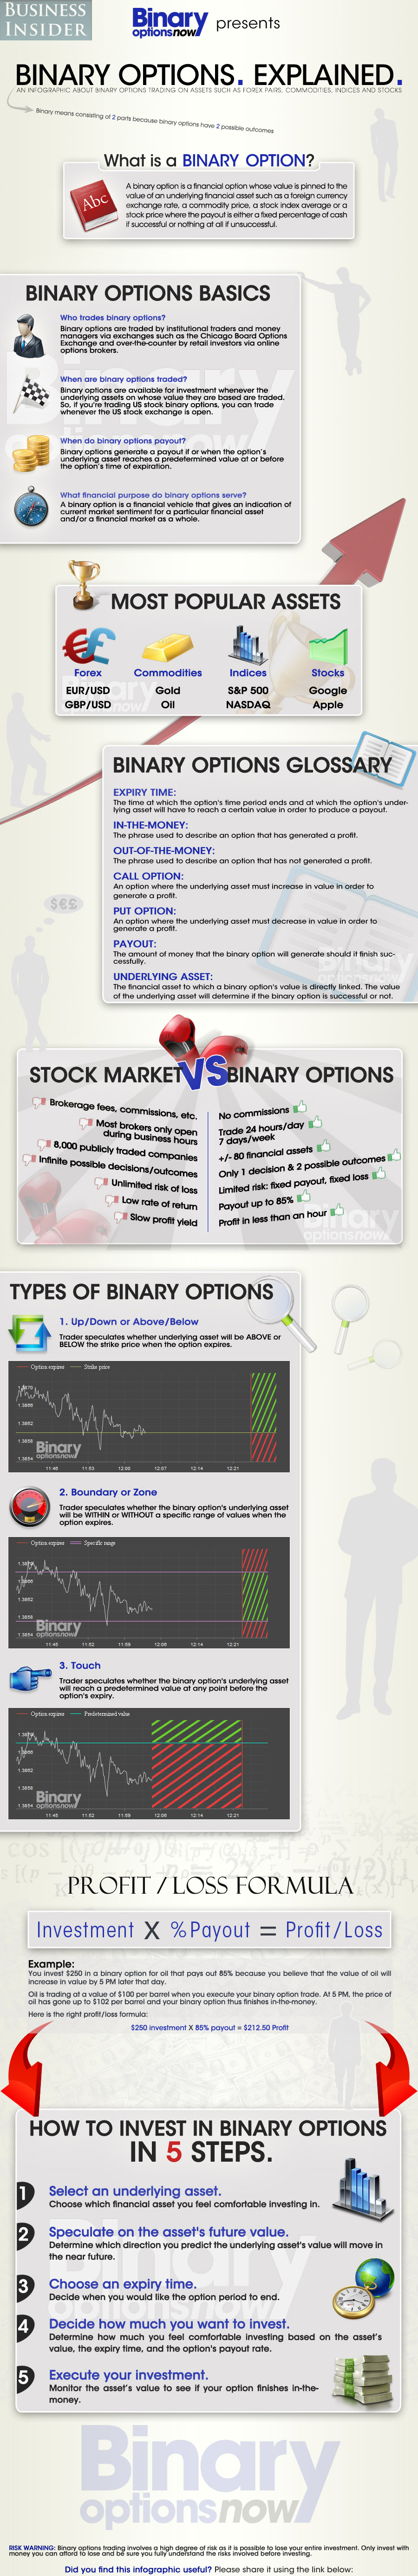 Binary options online business